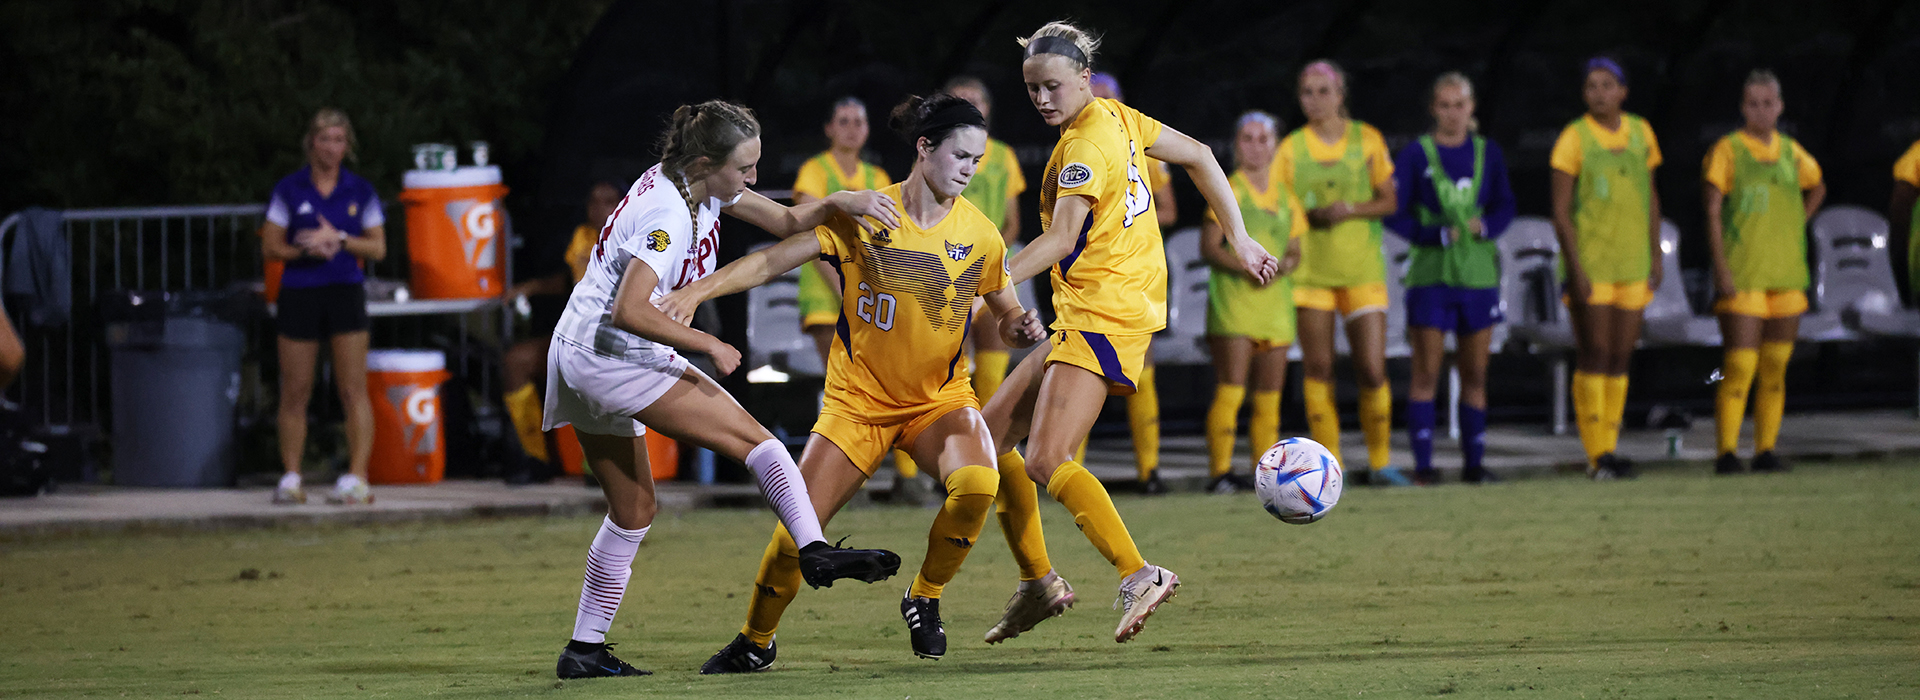 Tech upended 1-0 by IUPUI in season opener